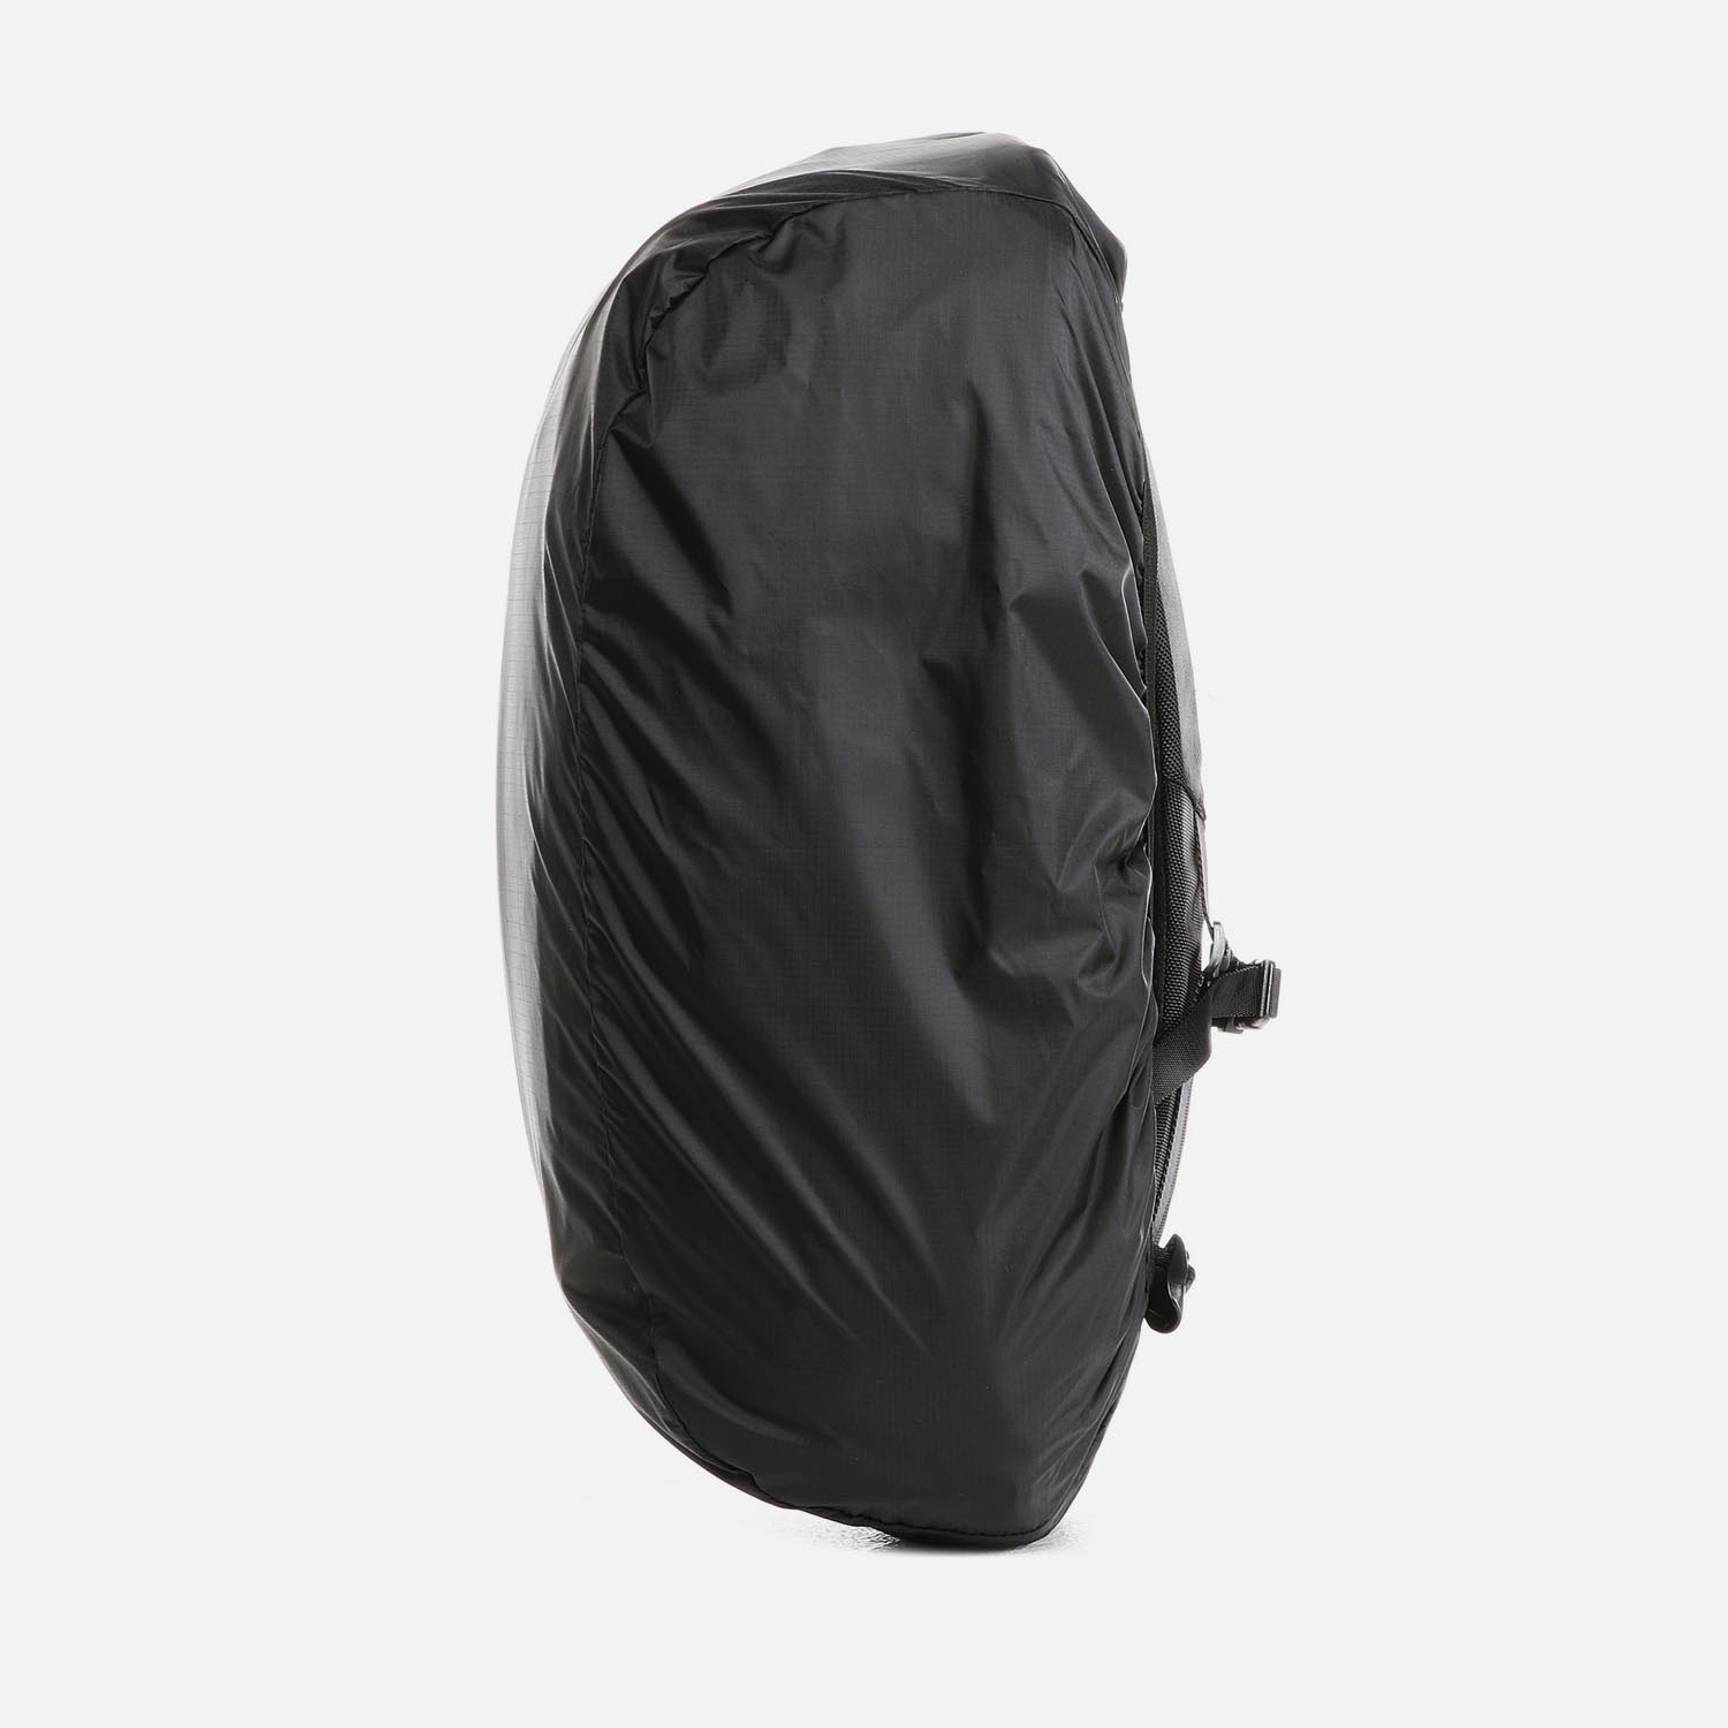 Backpack Rain Cover – Luggage Cover